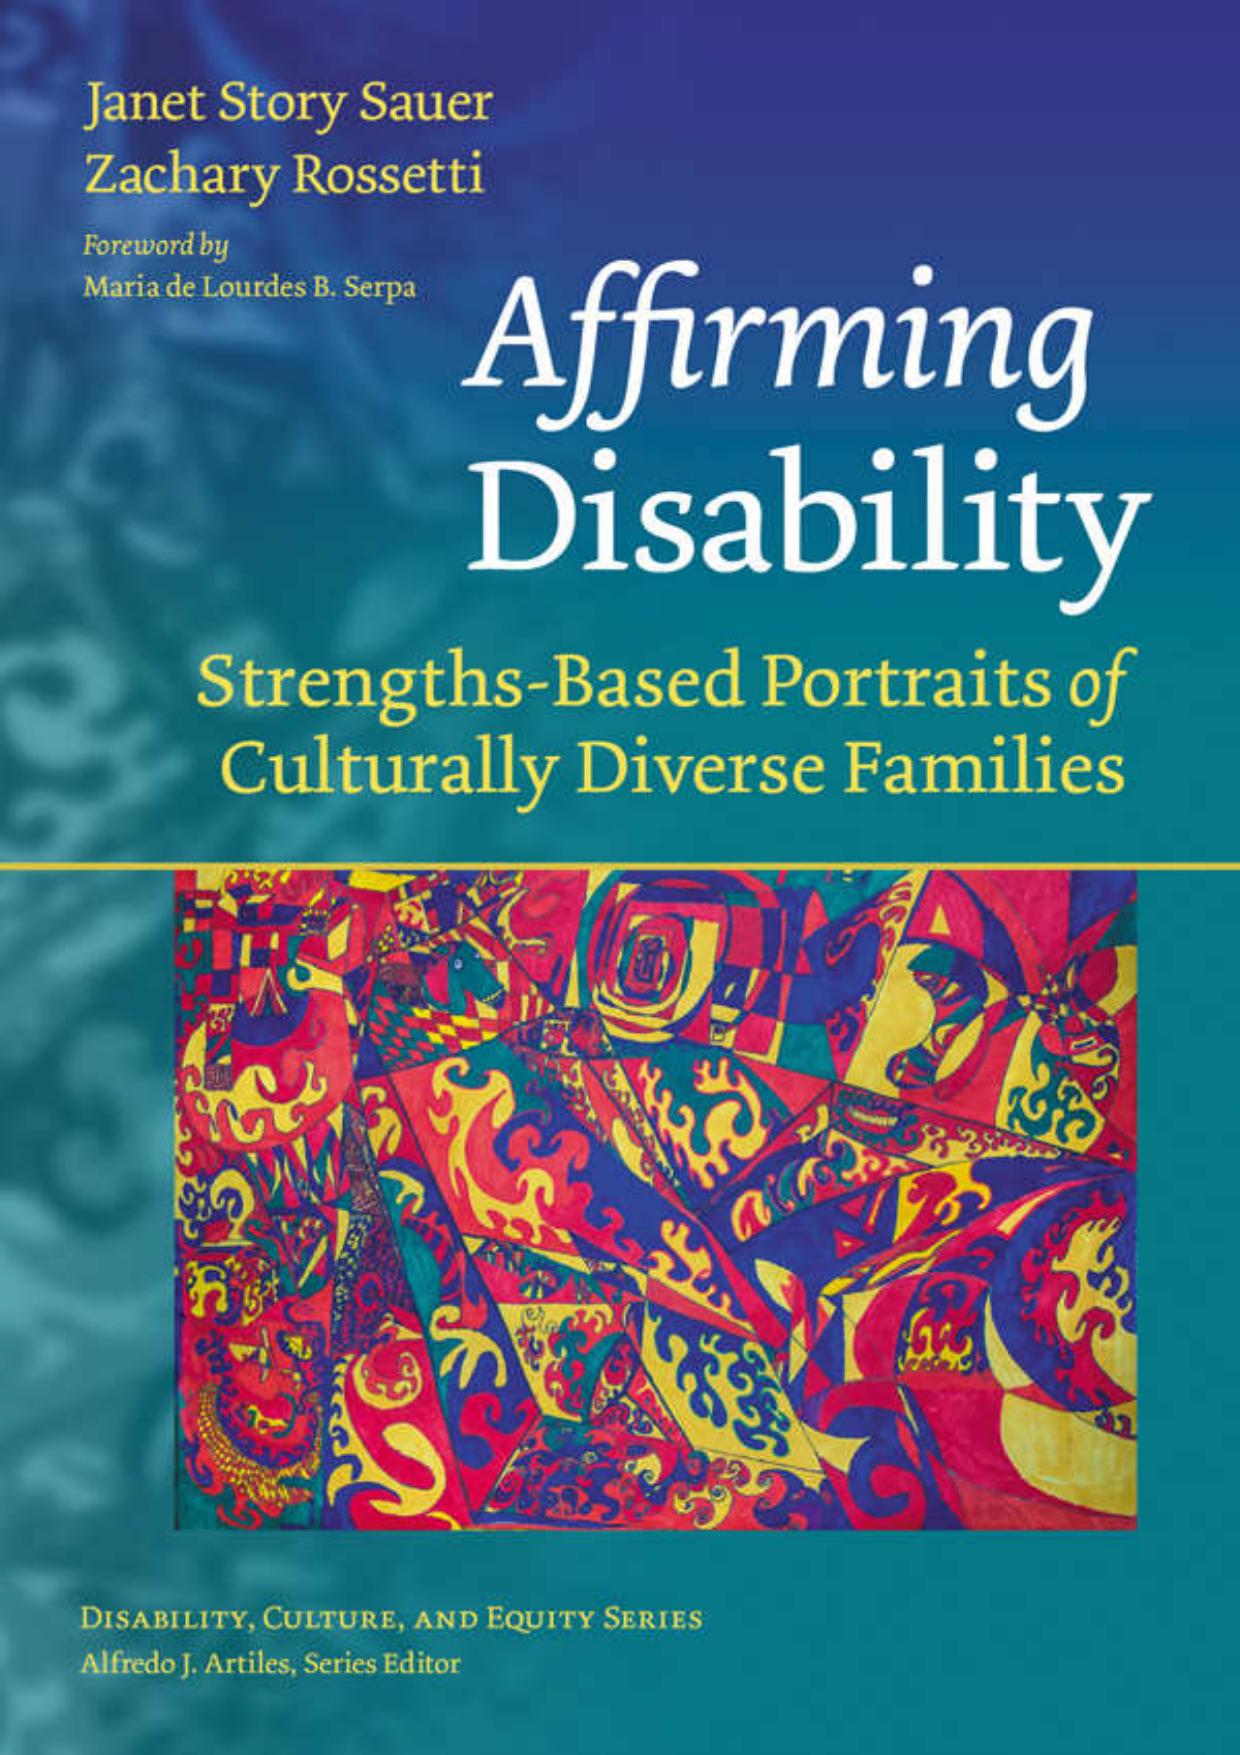 (eBook PDF)Affirming Disability: Strengths-Based Portraits of Culturally Diverse Families by Janet Story Sauer , Zachary Rossetti